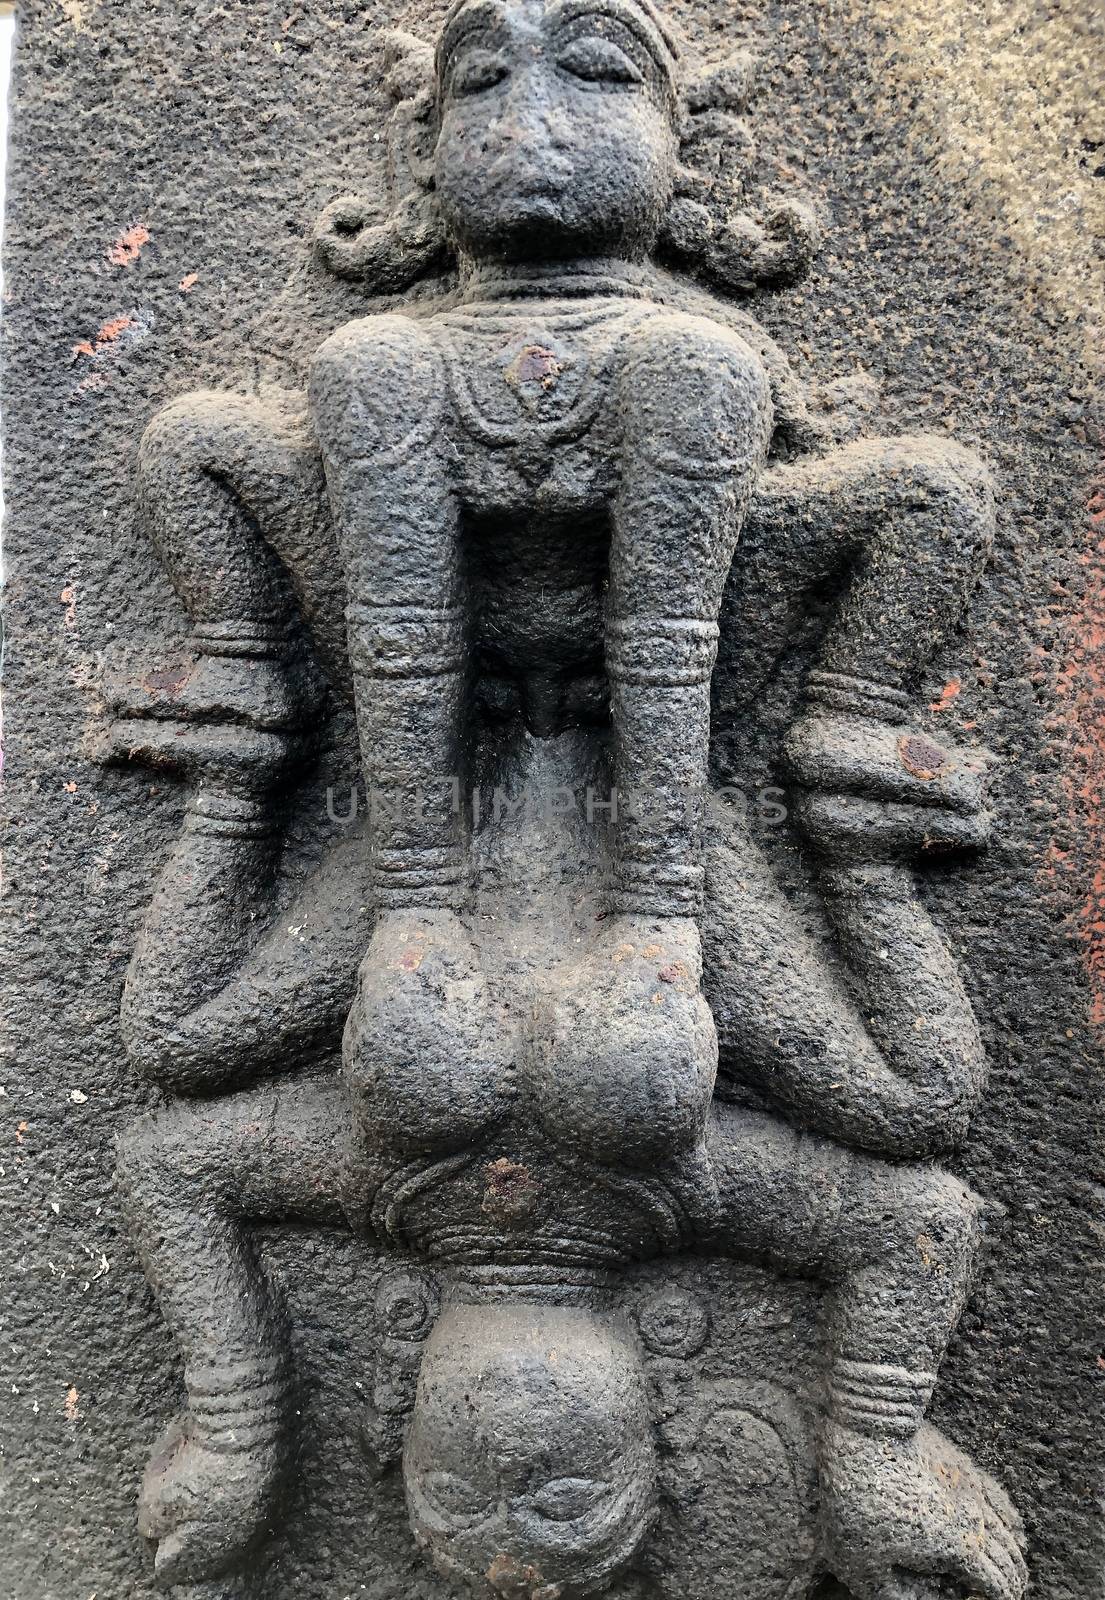 Man and Woman performing sex position act sculpture. Bas relief sculpture carved in the walls of Shiva temple at Tamil nadu by prabhakaran851